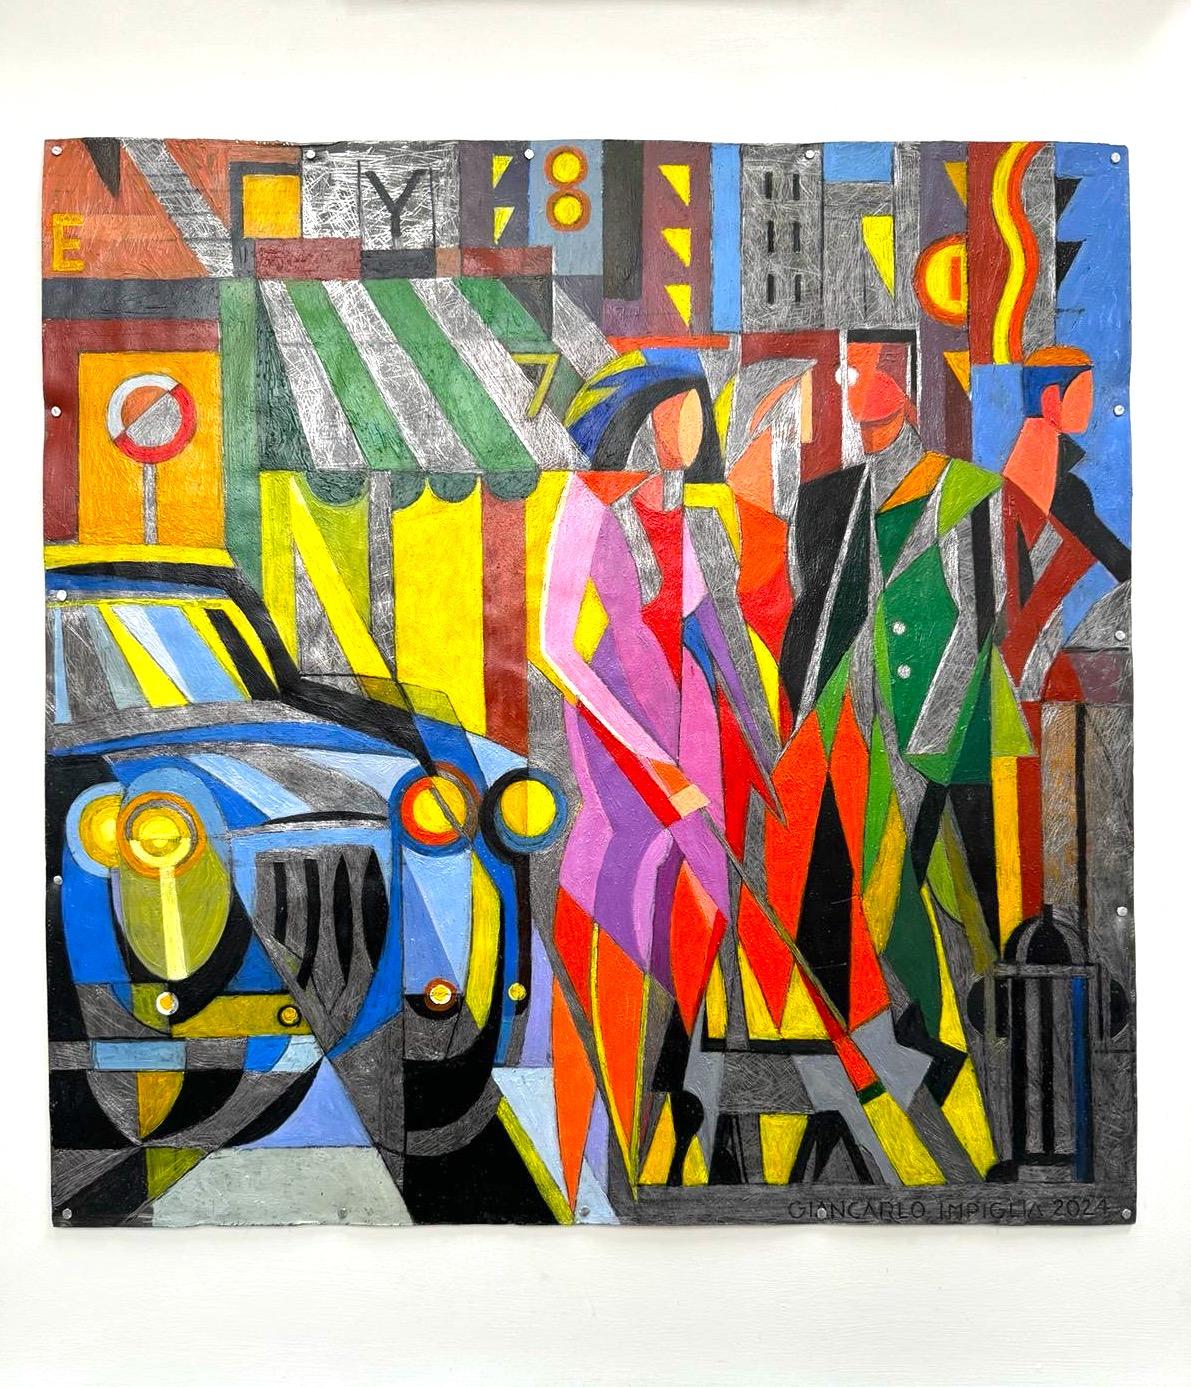 A new work by the indelible Giancarlo Impiglia. 

Born in Rome, Impiglia moved to New York in the 70s, where he established a signature style on the shoulders of Futurism and Cubism, his technical skill underpinning his eclecticism and allowing him